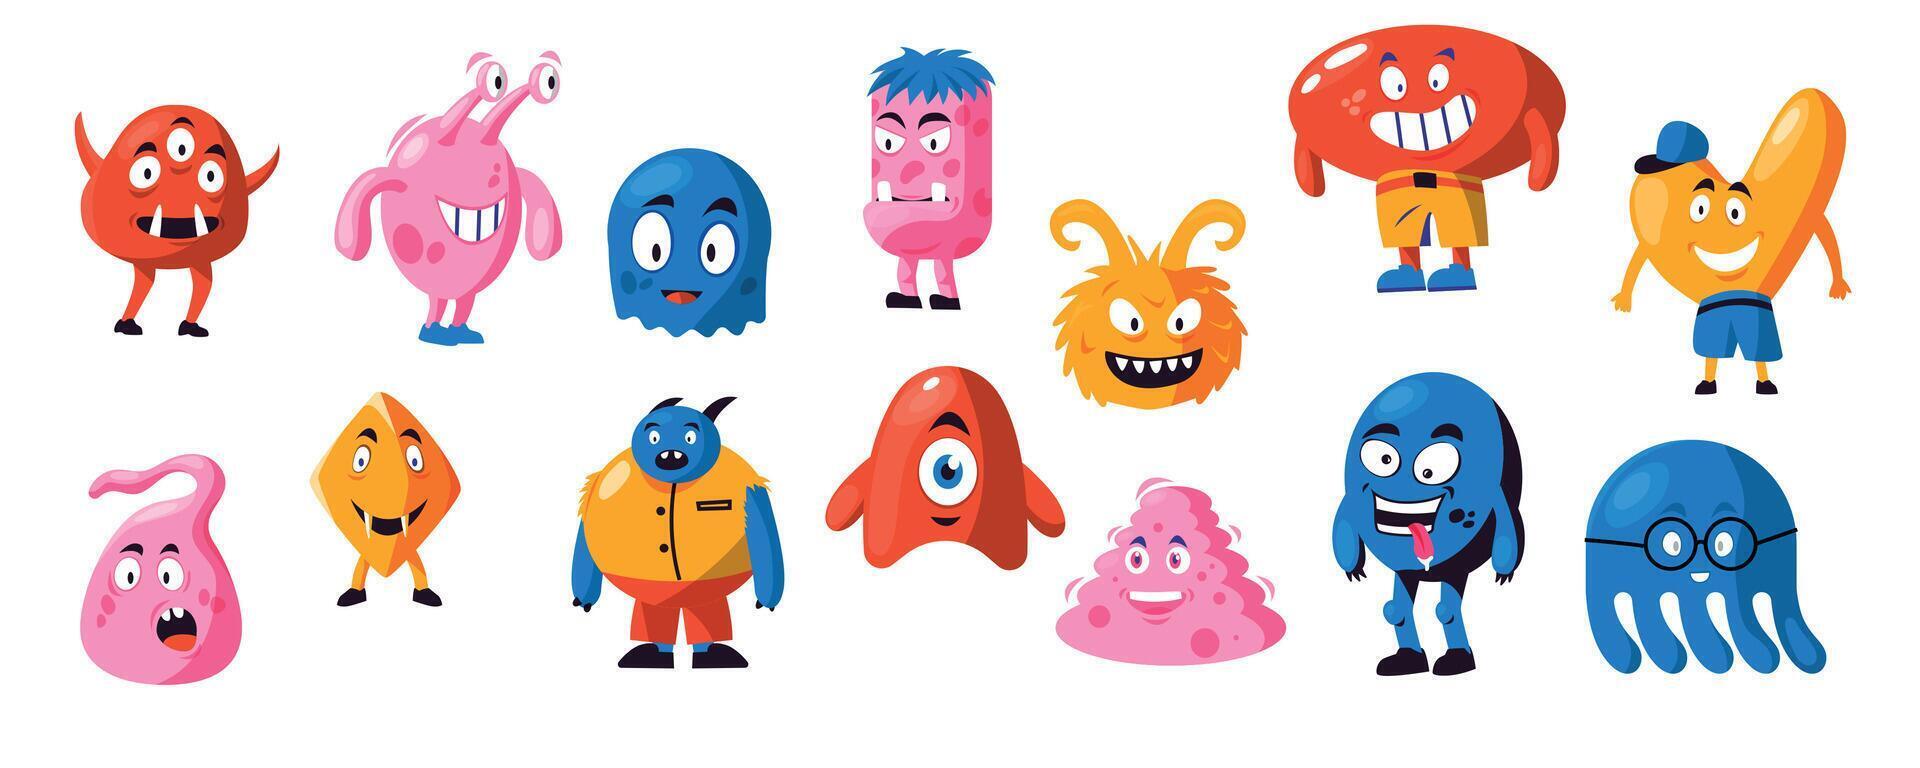 Funny monster shapes. Cute abstract monster faces with different emotions, whimsical kid characters with distorted faces and bodies. Vector isolated set